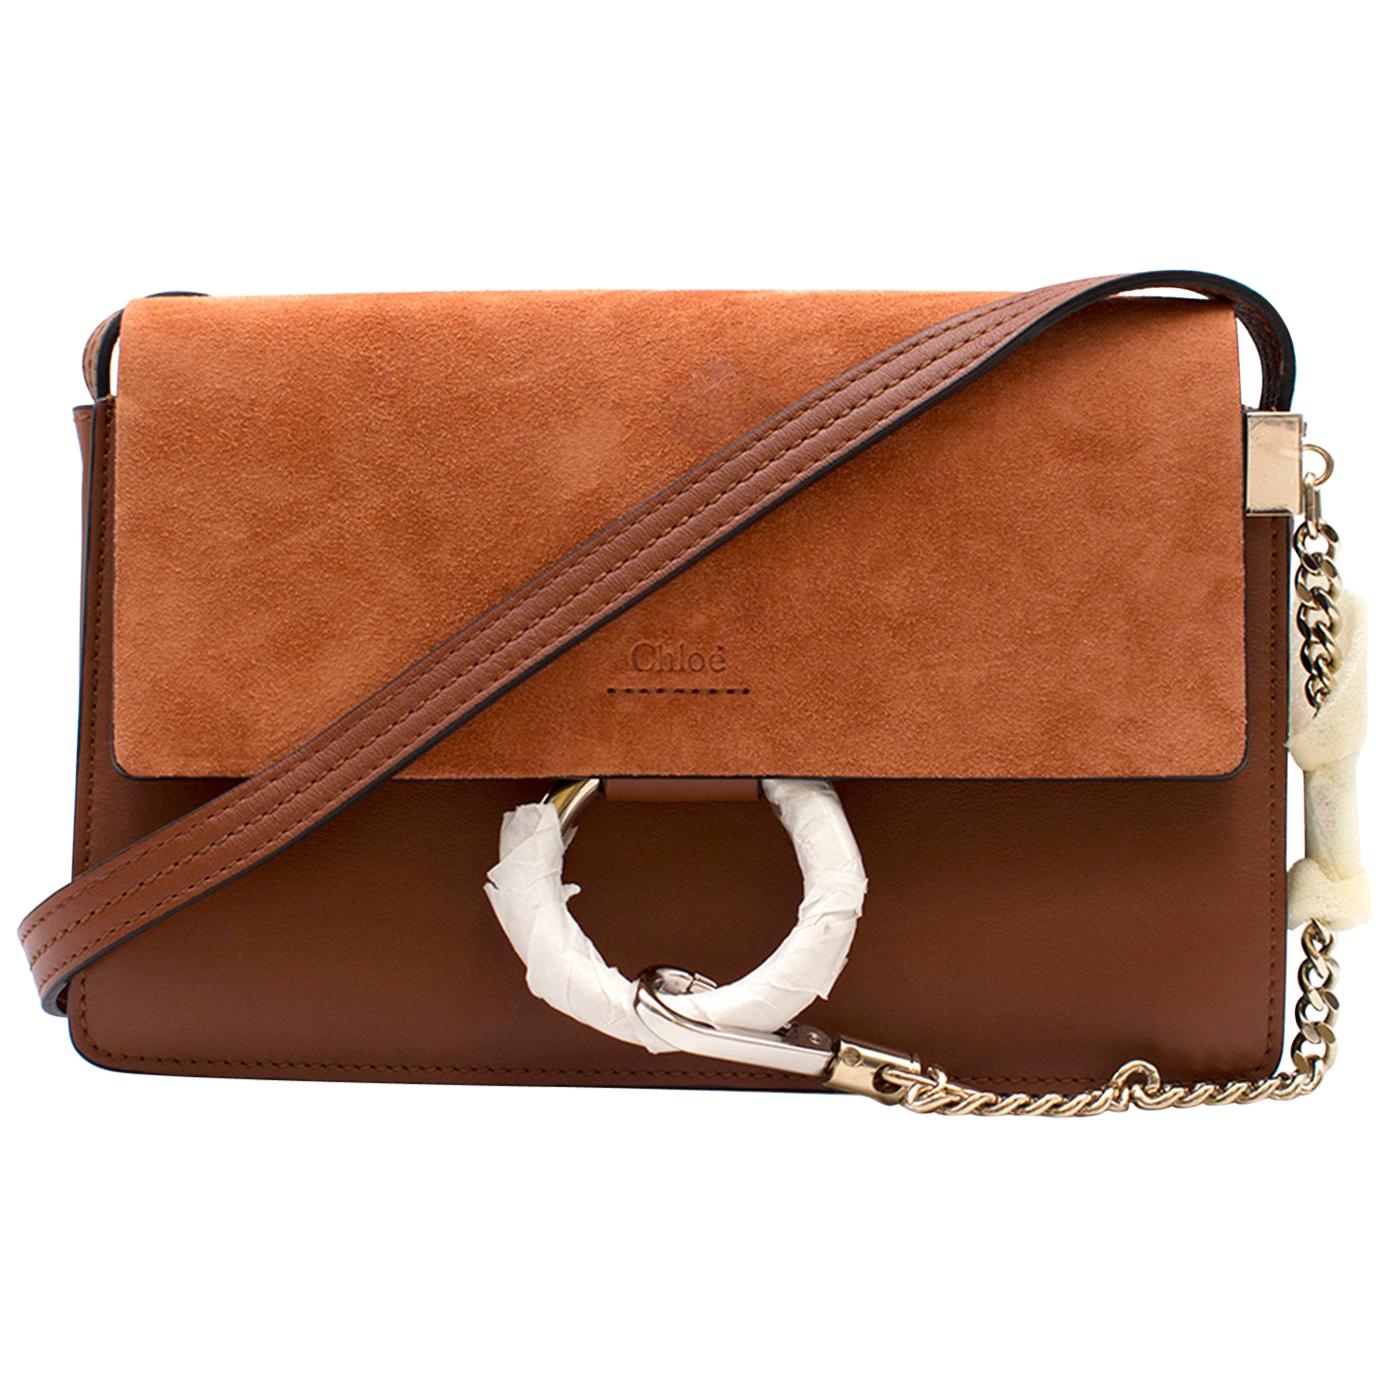 Chloe Faye Leather and Suede Crossbody Bag For Sale